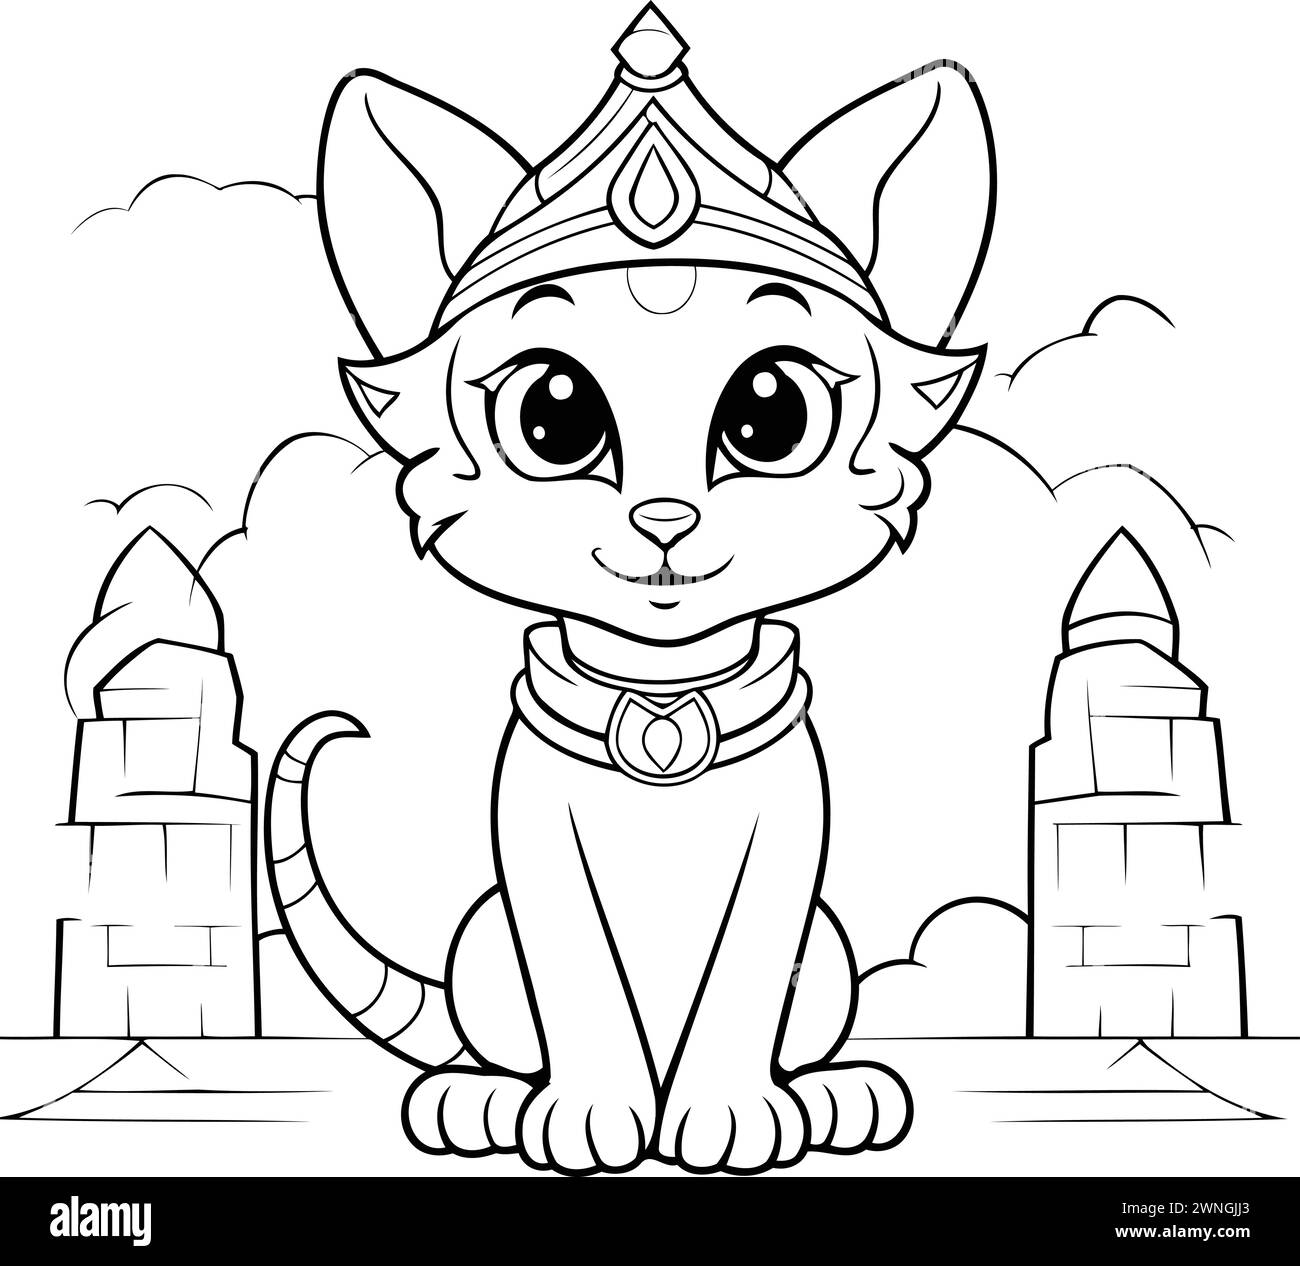 Black and White Cartoon Illustration of Cute Cat with Crown Coloring Book Stock Vector